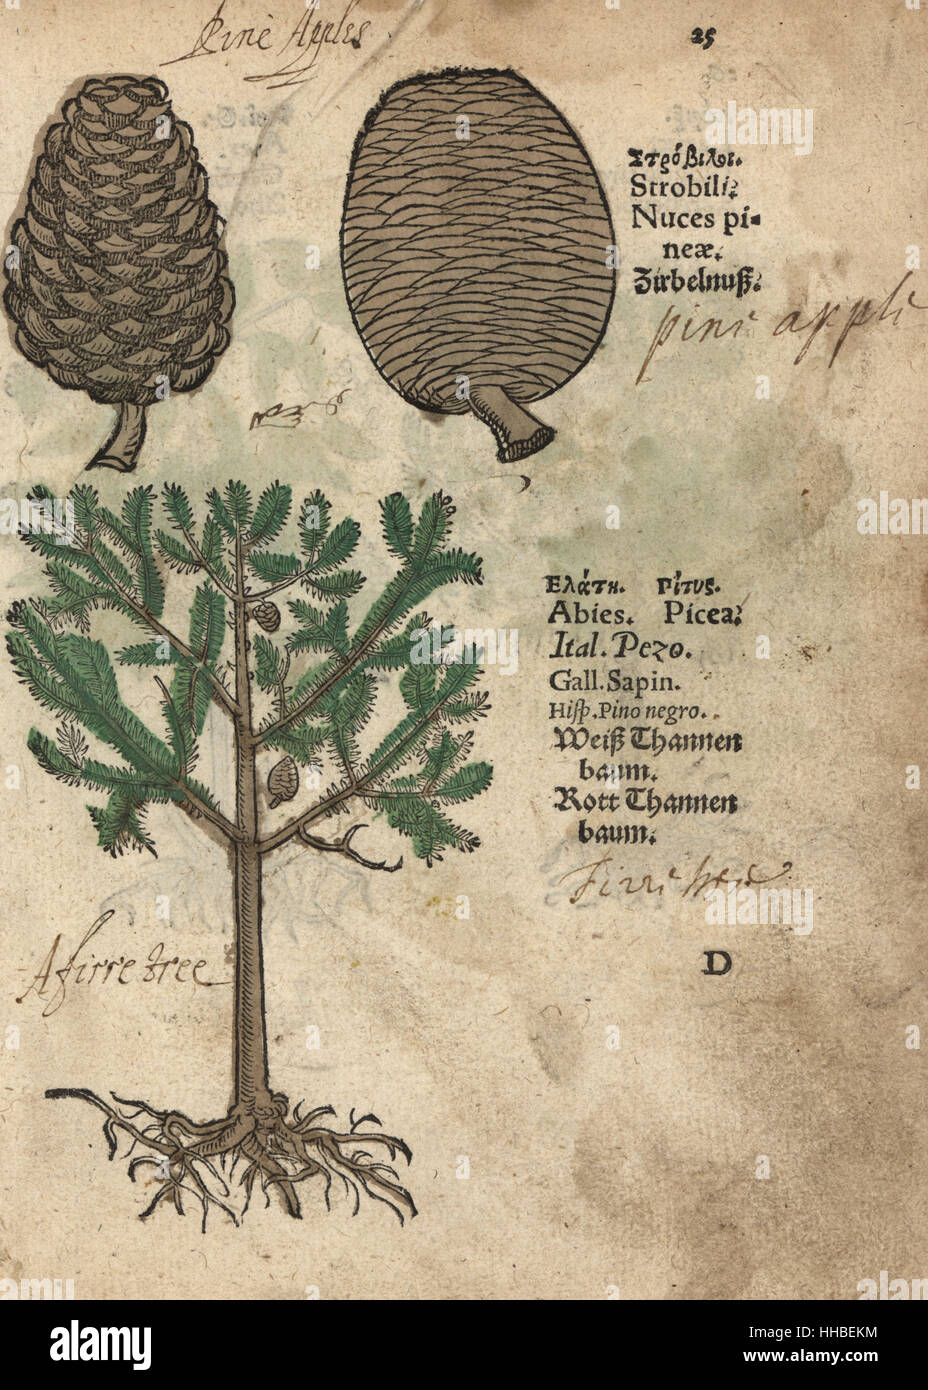 Norway spruce, Picea abies, and pine cones or pine apples. Handcoloured woodblock engraving of a botanical illustration from Adam Lonicer's Krauterbuch, or Herbal, Frankfurt, 1557. This from a 17th century pirate edition or atlas of illustrations only, with captions in Latin, Greek, French, Italian, German, and in English manuscript. Stock Photo